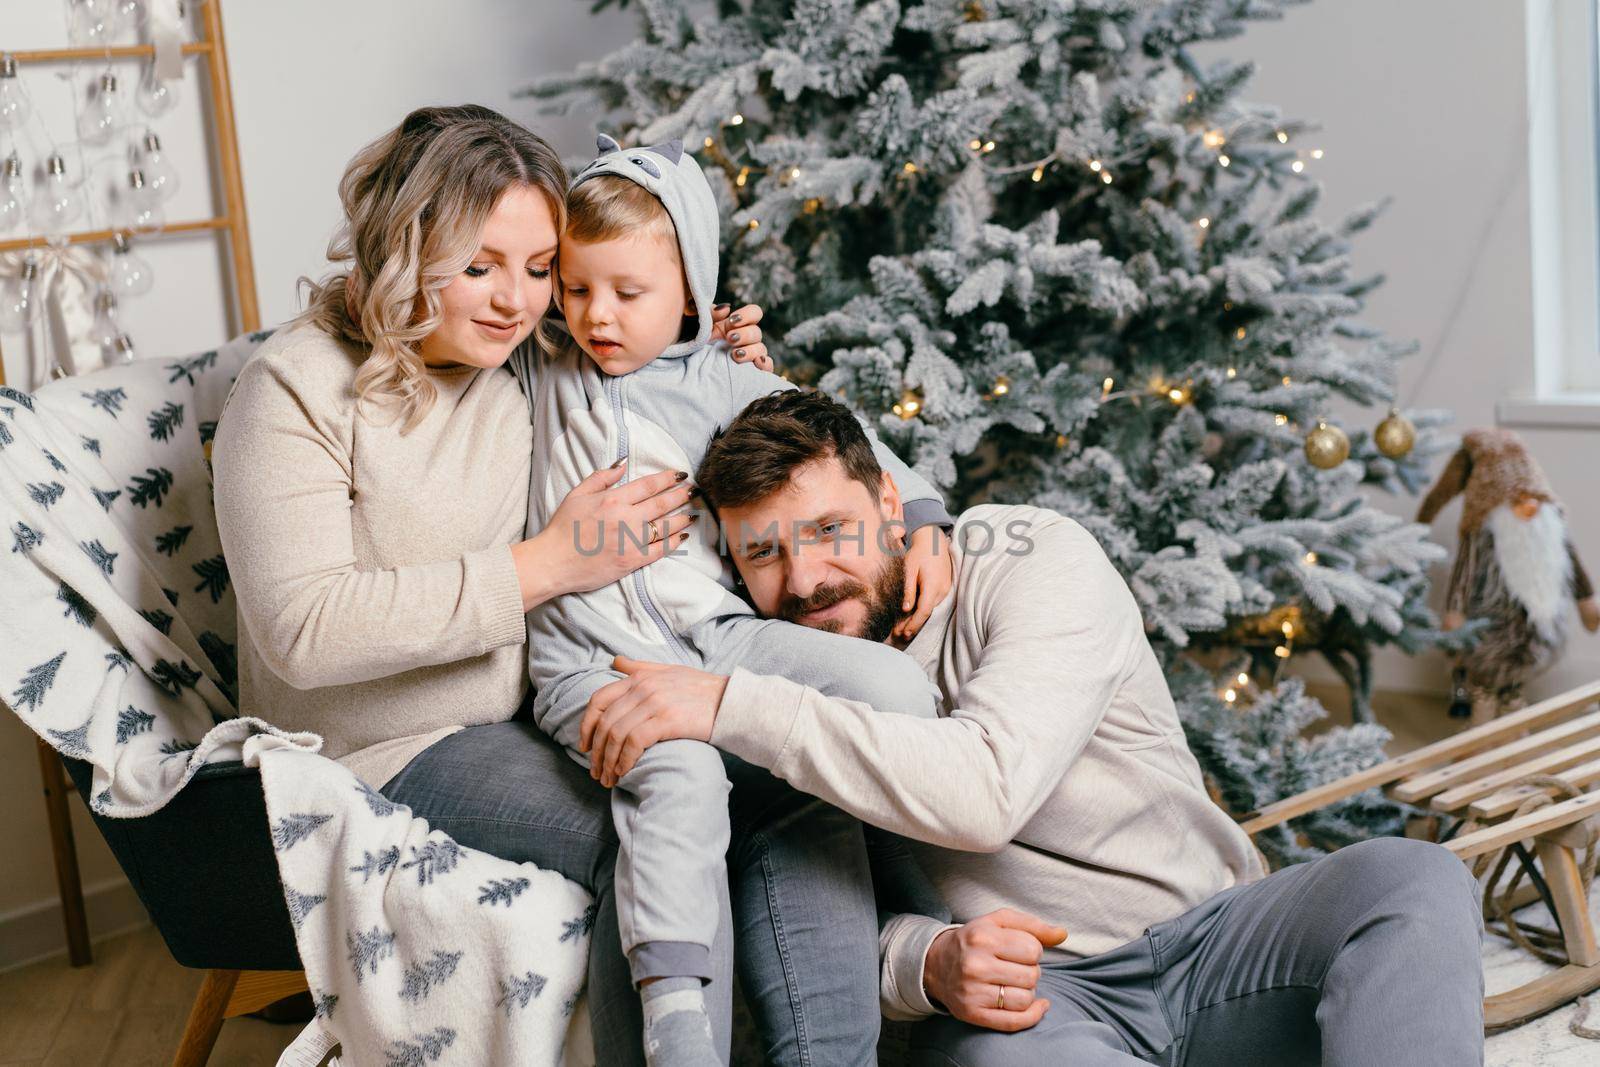 Christmas Family Happiness Portrait of dad, pregnant mom and little son sitting armchair at home near Christmas tree hug smile European young adult family holiday morning